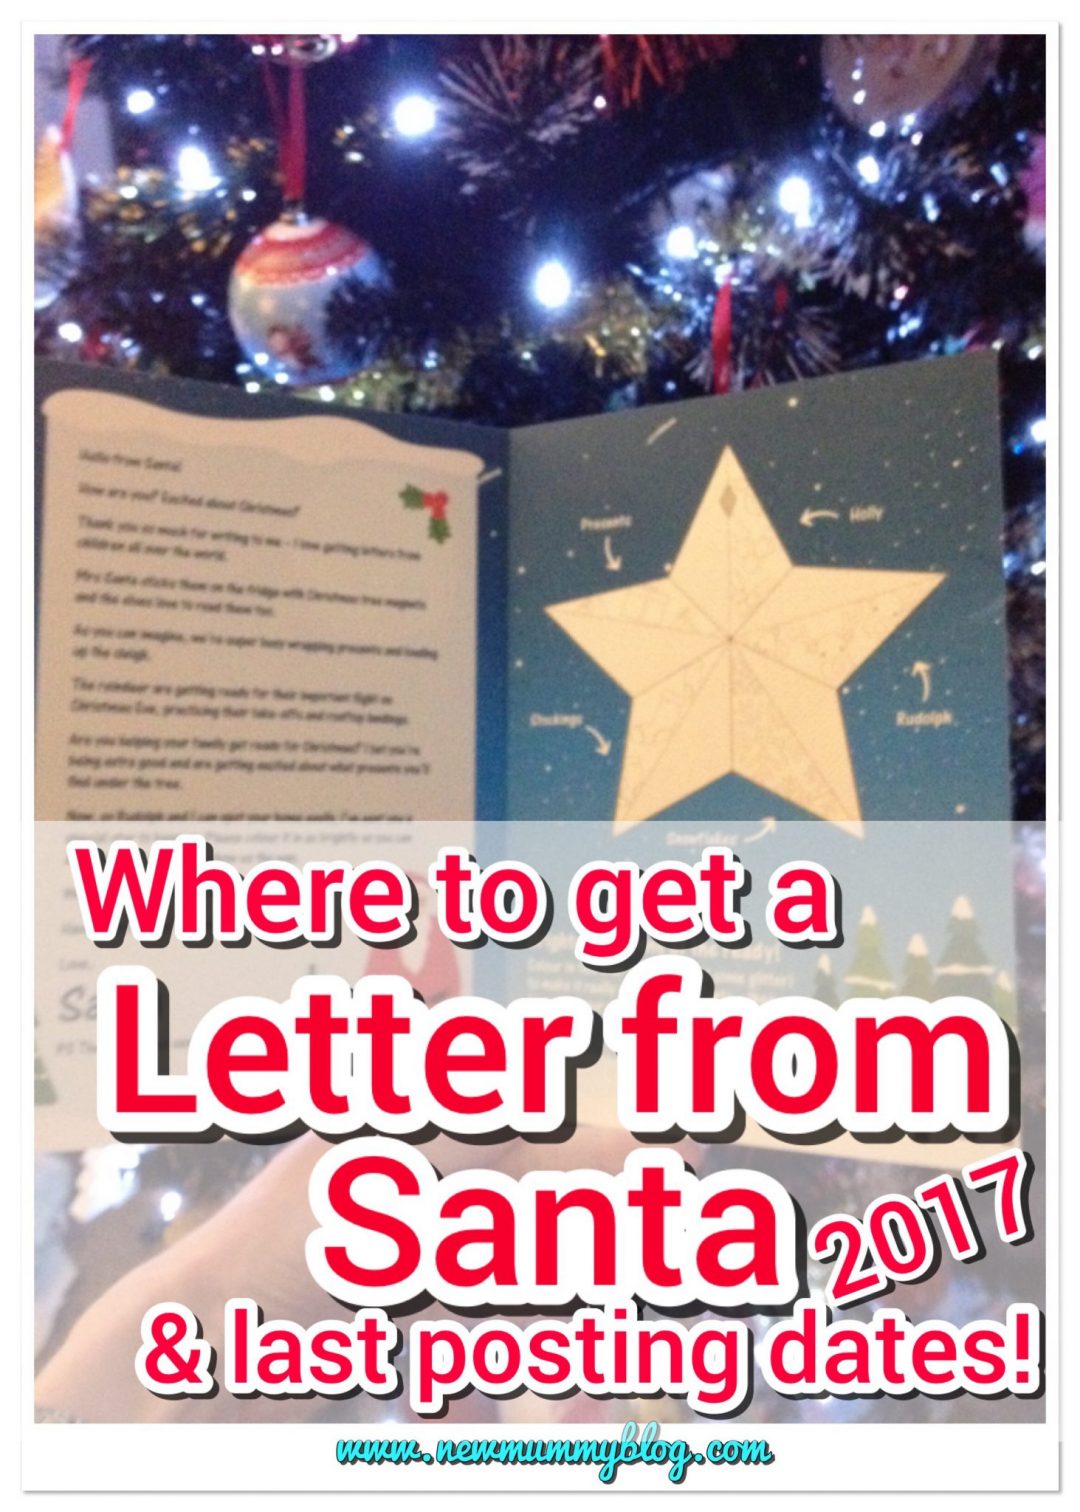 Letter from Santa 2017 Father Christmas 